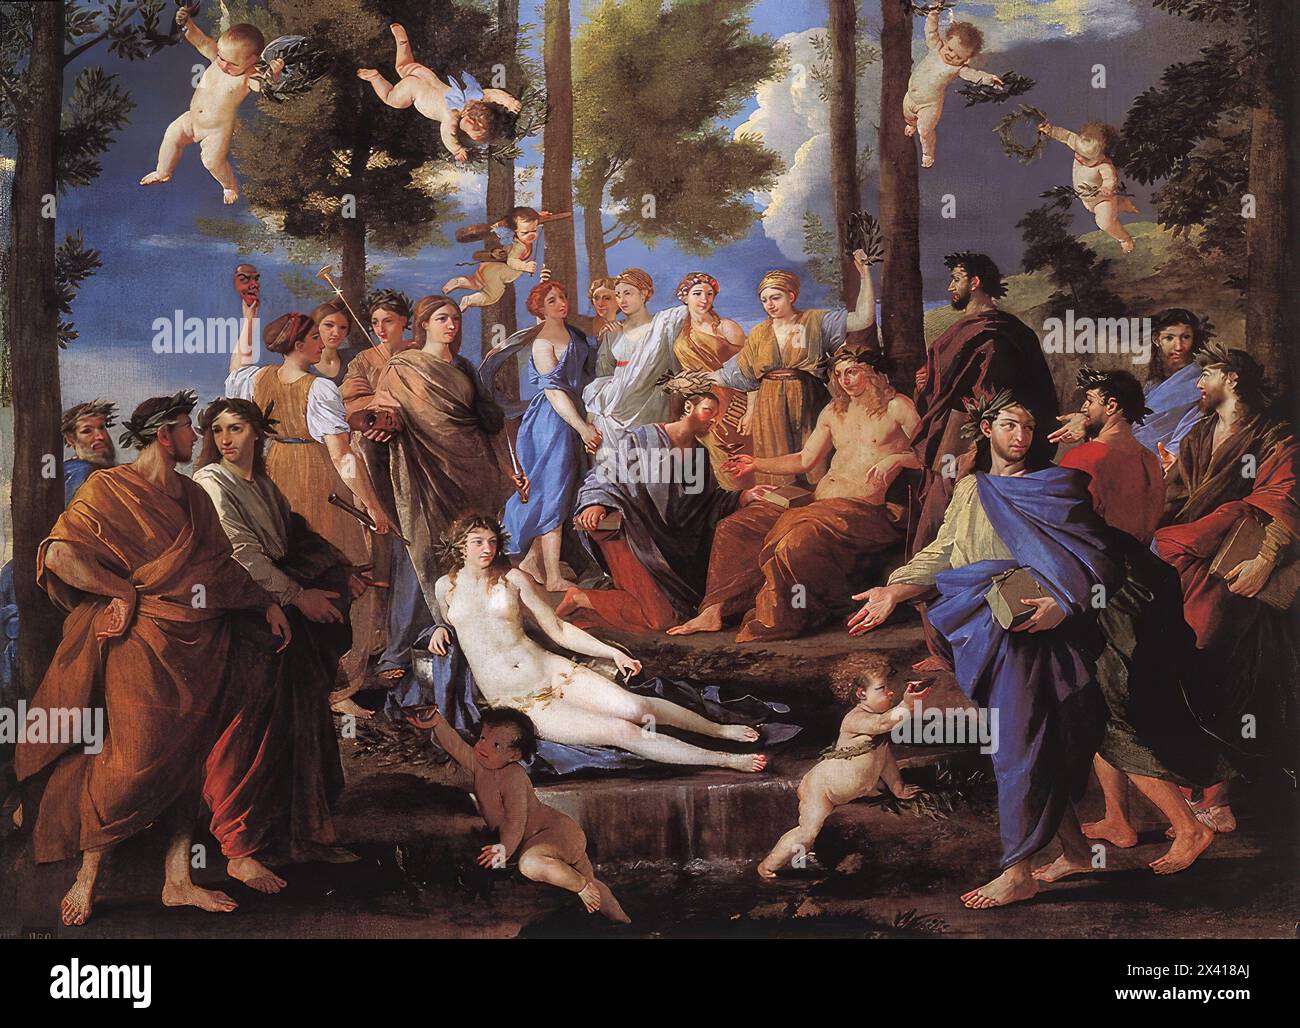 POUSSIN, Nicolas (b. 1594, Les Andelys, d. 1665, Roma)  Apollo and the Muses (Parnassus) 1630s Oil on canvas, 125 x 197 cm Museo del Prado, Madrid  Nicolas Poussin was undoubtedly the most important French artist of the seventeenth century, and the major exponent of Baroque classicism. Although he worked in Rome most of his life, his influence not only in Italy but also on French painting was profound. His art was richly informed by prolonged study of the classical past and of the High Renaissance - both of classical sculpture and of Raphael and Titian. He created an extraordinarily controlled Stock Photo